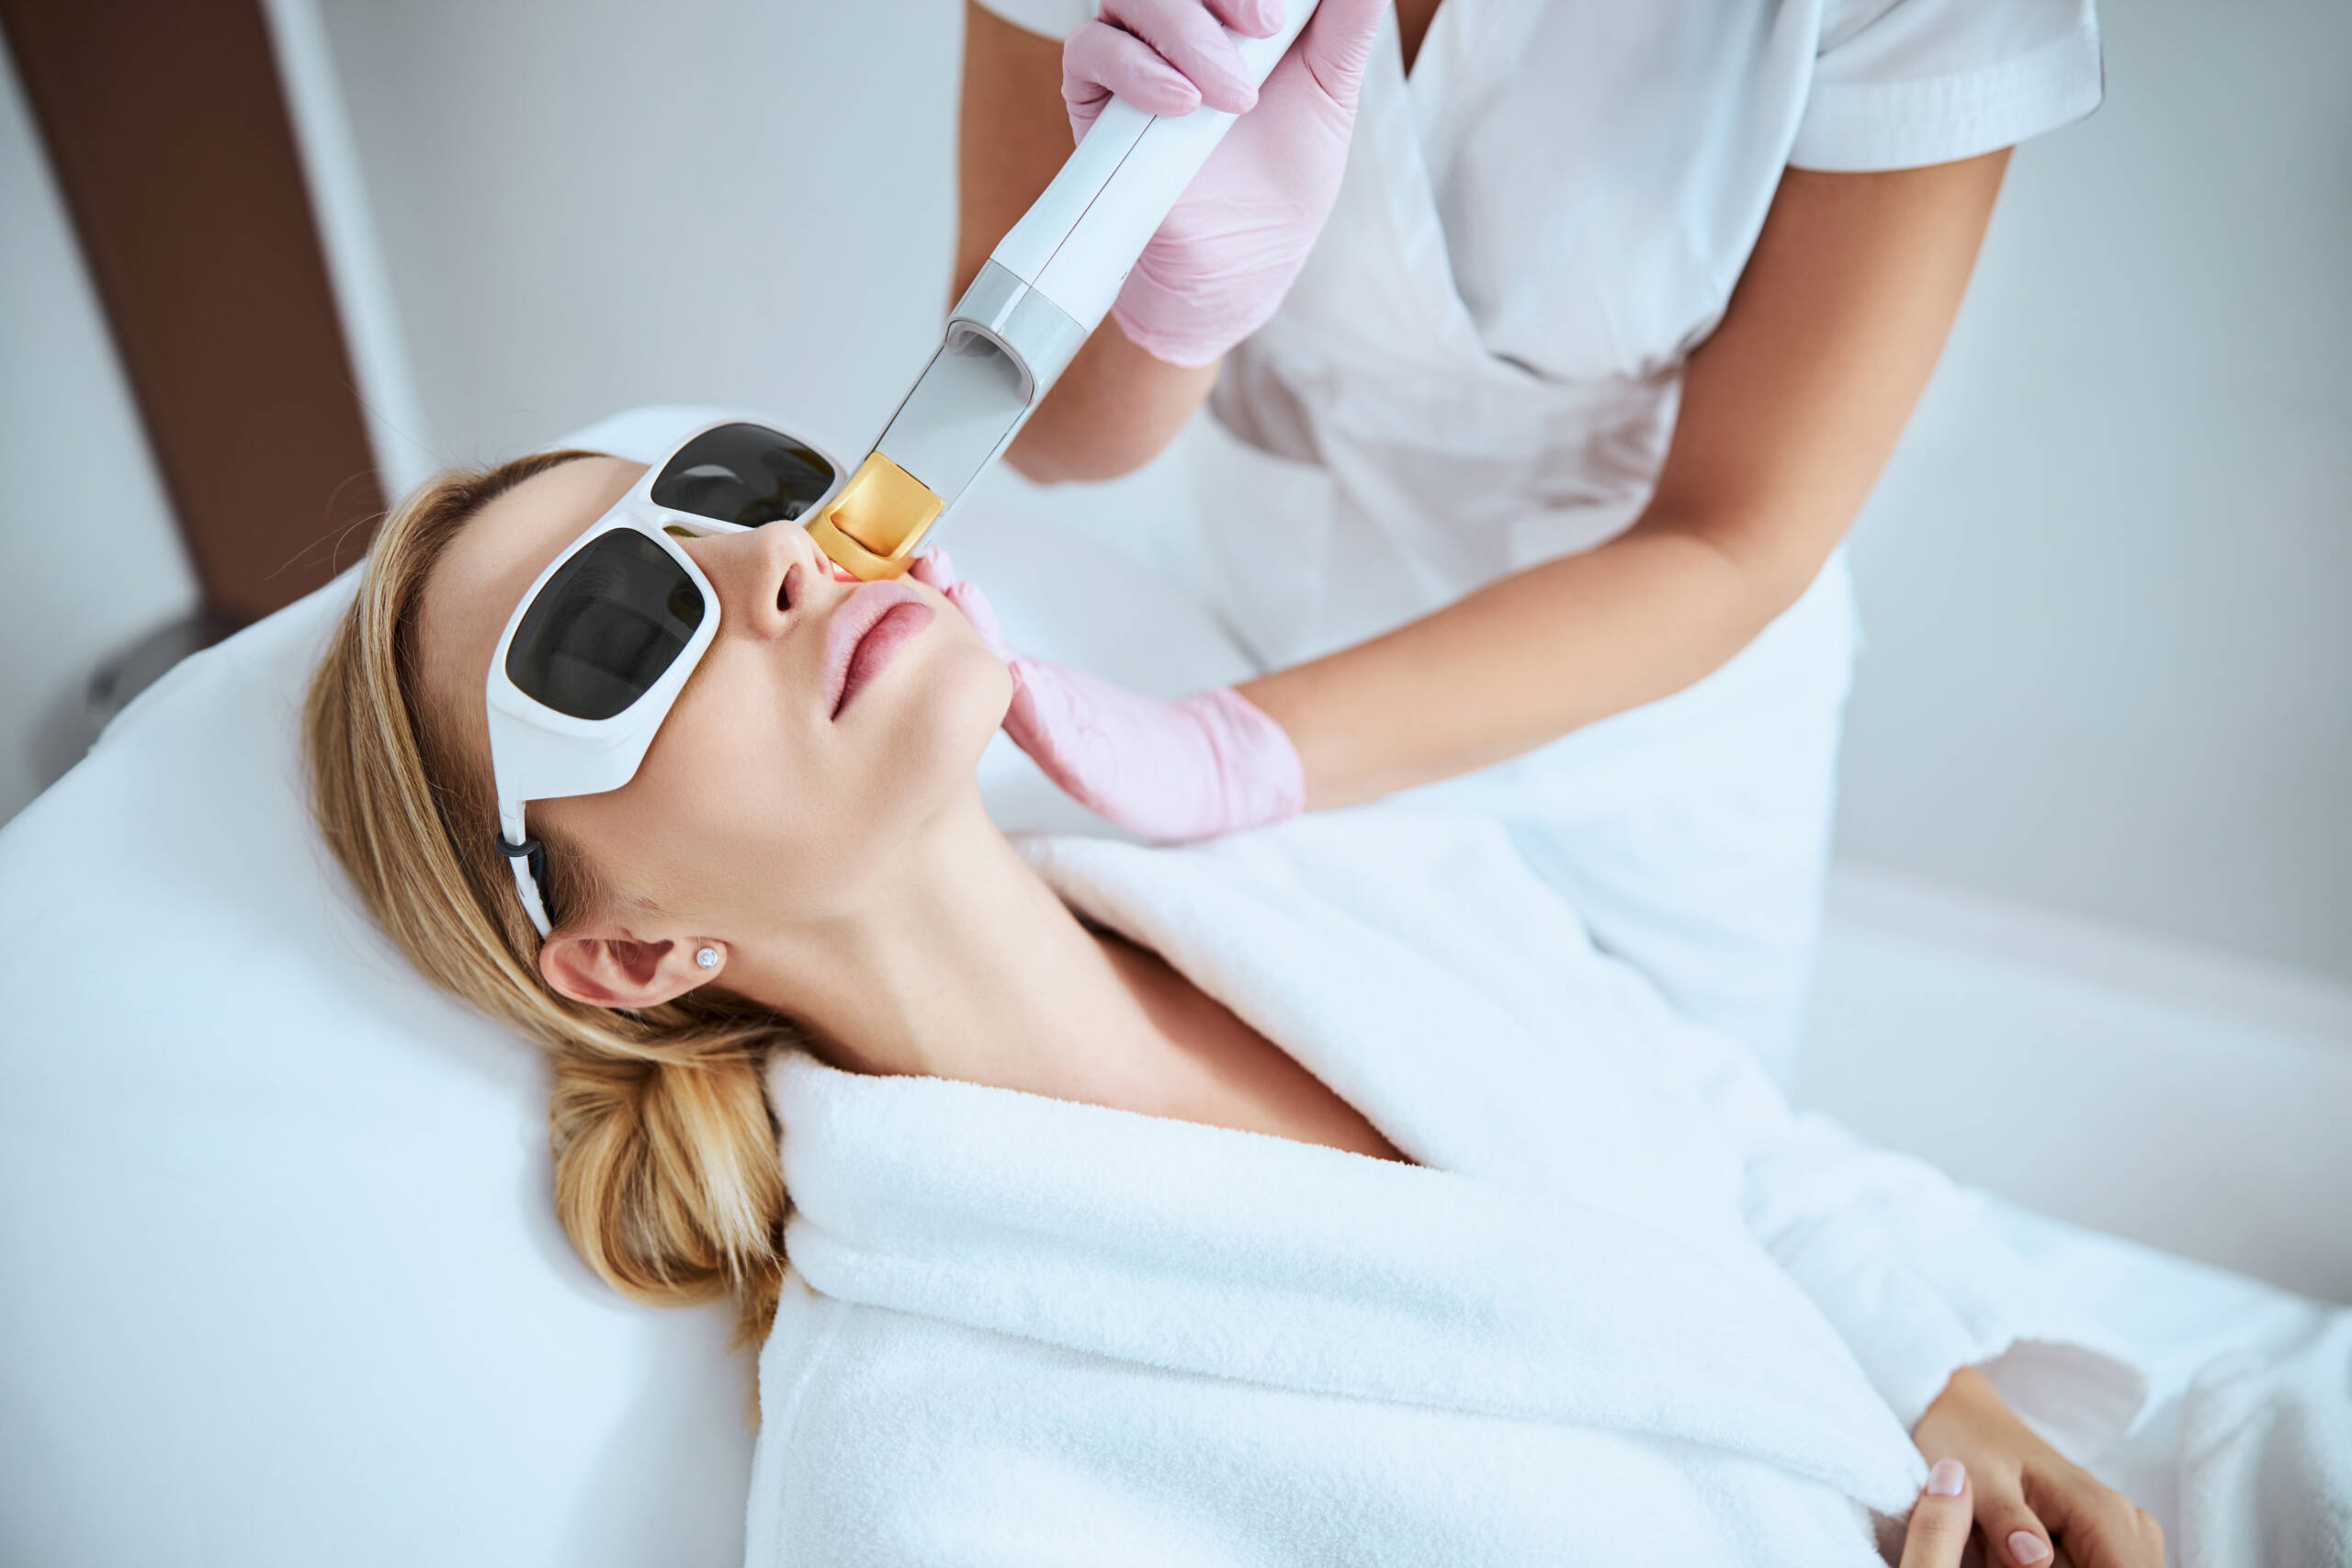 CO2 treatment | A white woman receiving resurfacing laser treatment to her face.